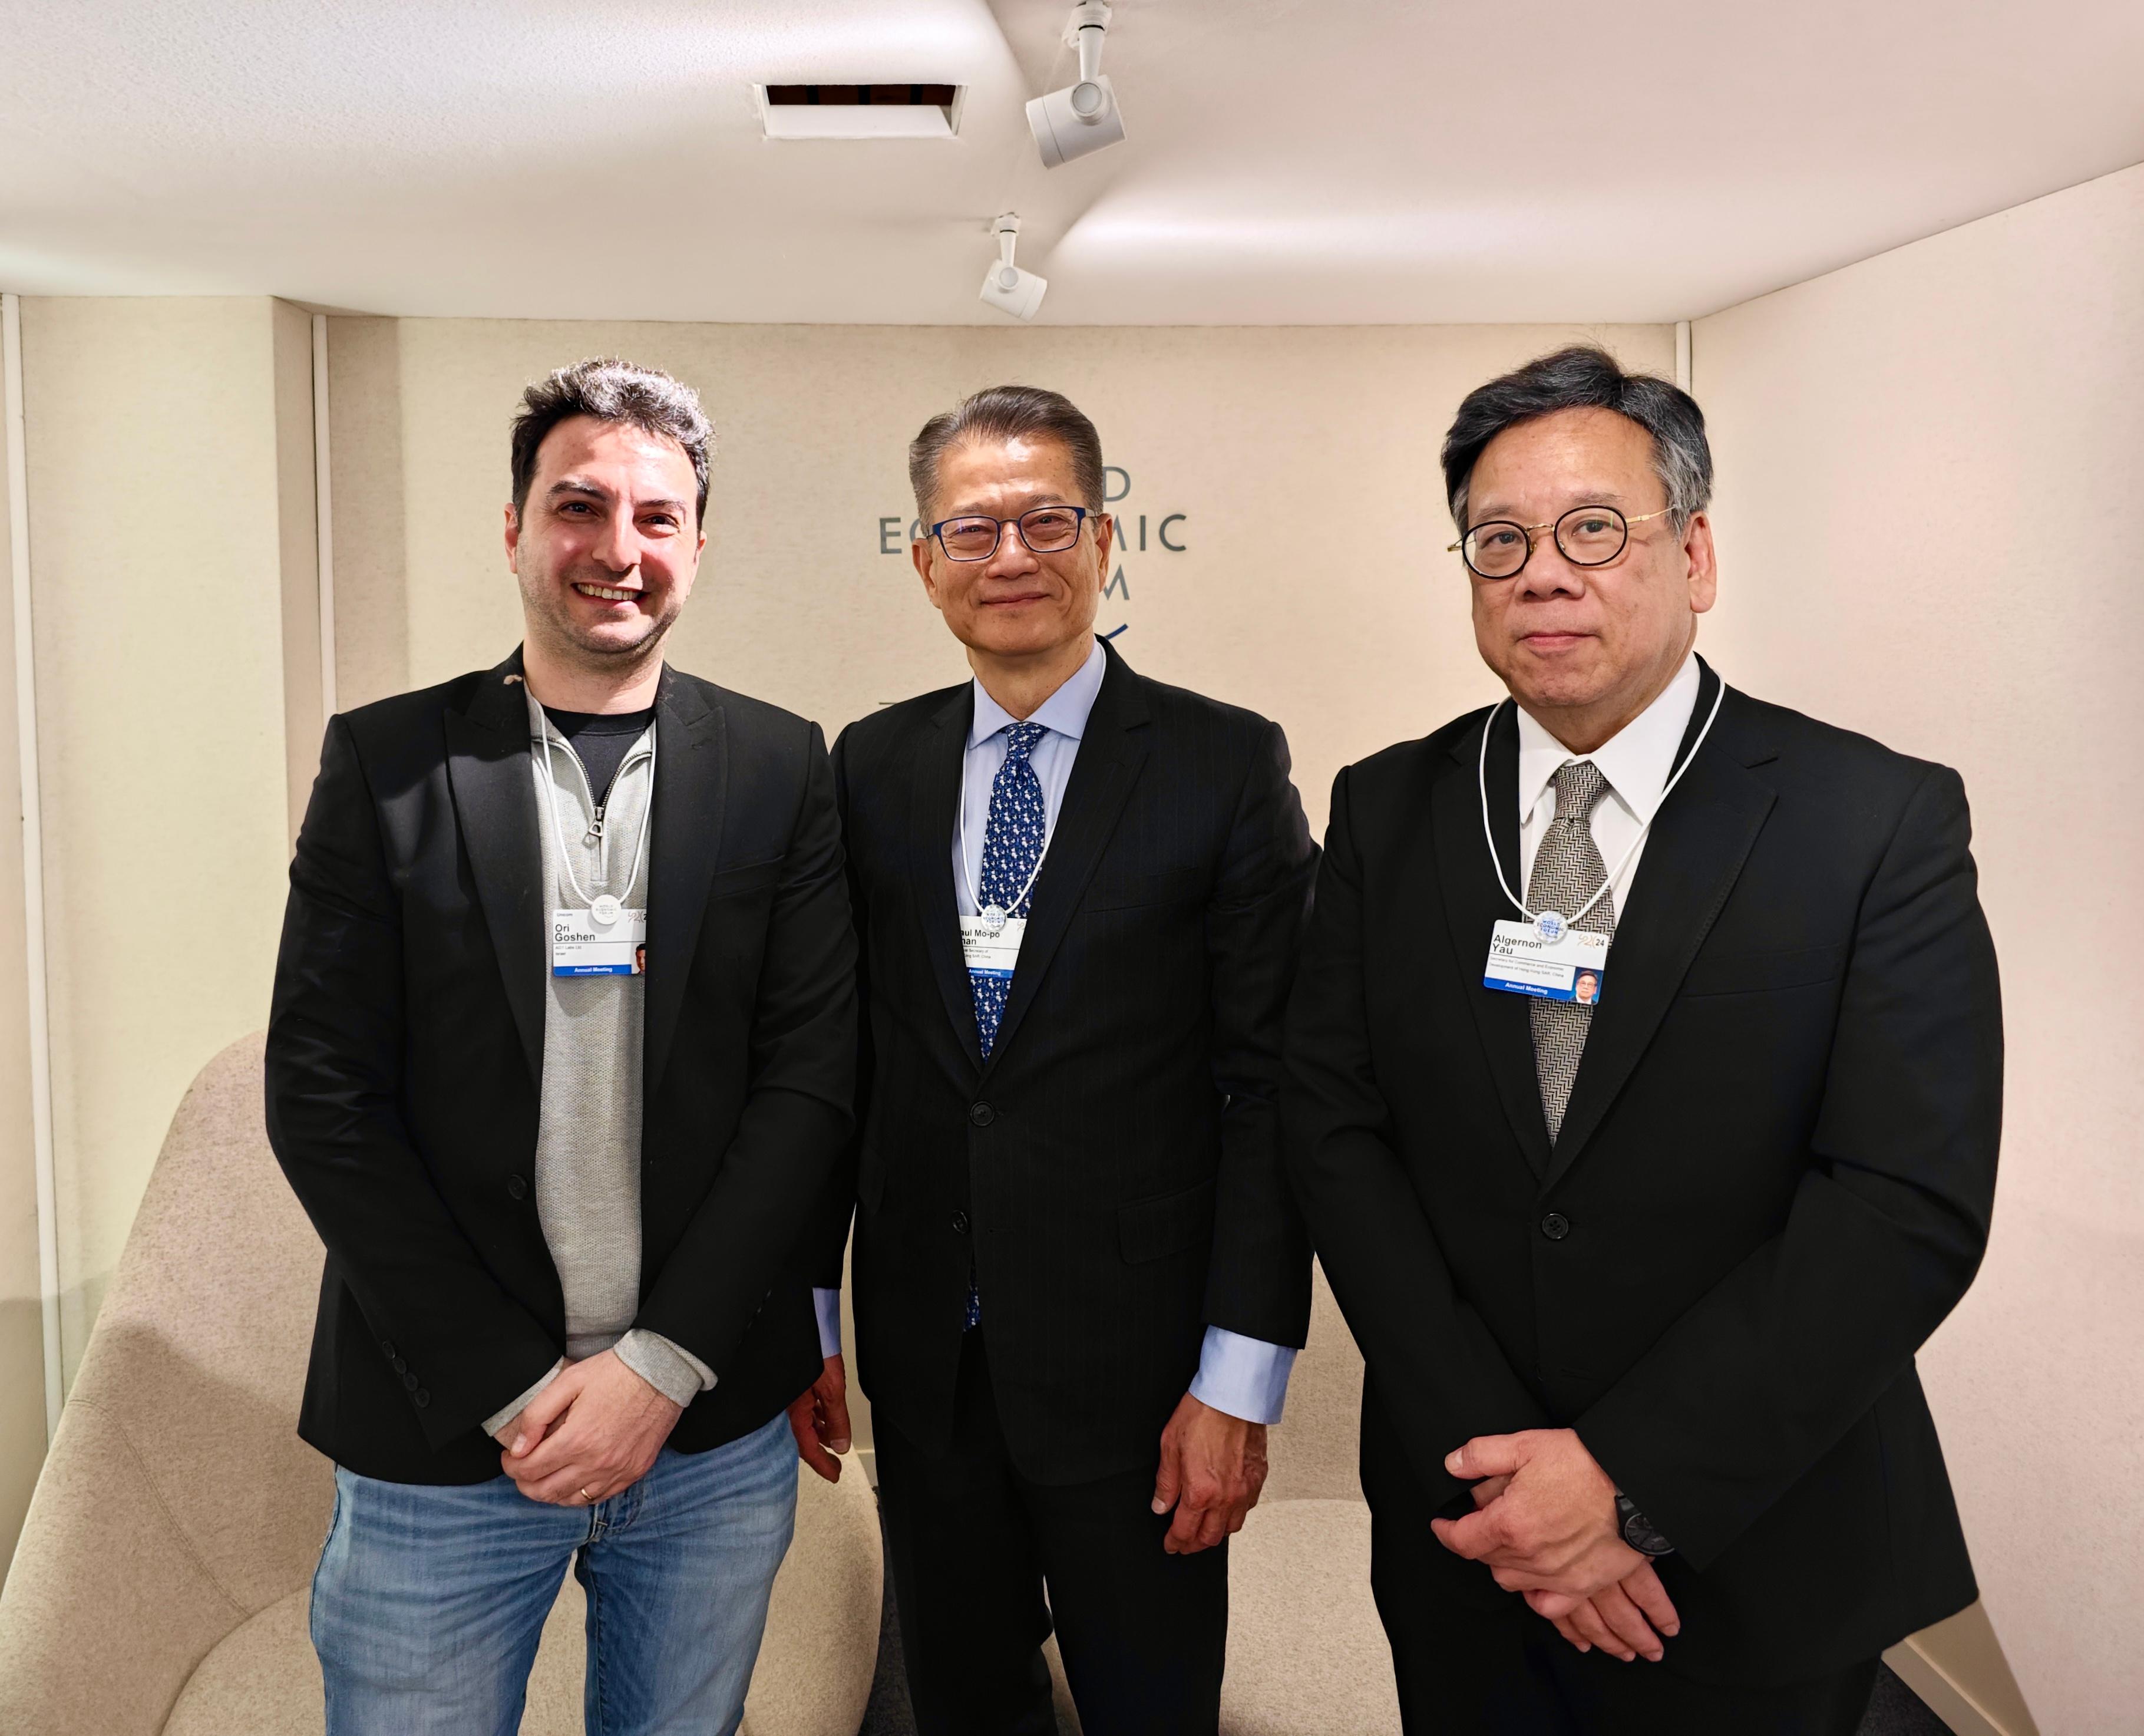 The Financial Secretary, Mr Paul Chan (centre) and the Secretary for Commerce and Economic Development, Mr Algernon Yau (right), meets with Co-Founder and Co-Chief Executive Officer of artificial intelligence company AI21 Labs, Mr Ori Goshen (left), on January 15 (Davos time) during the World Economic Forum Annual Meeting at Davos, Switzerland.